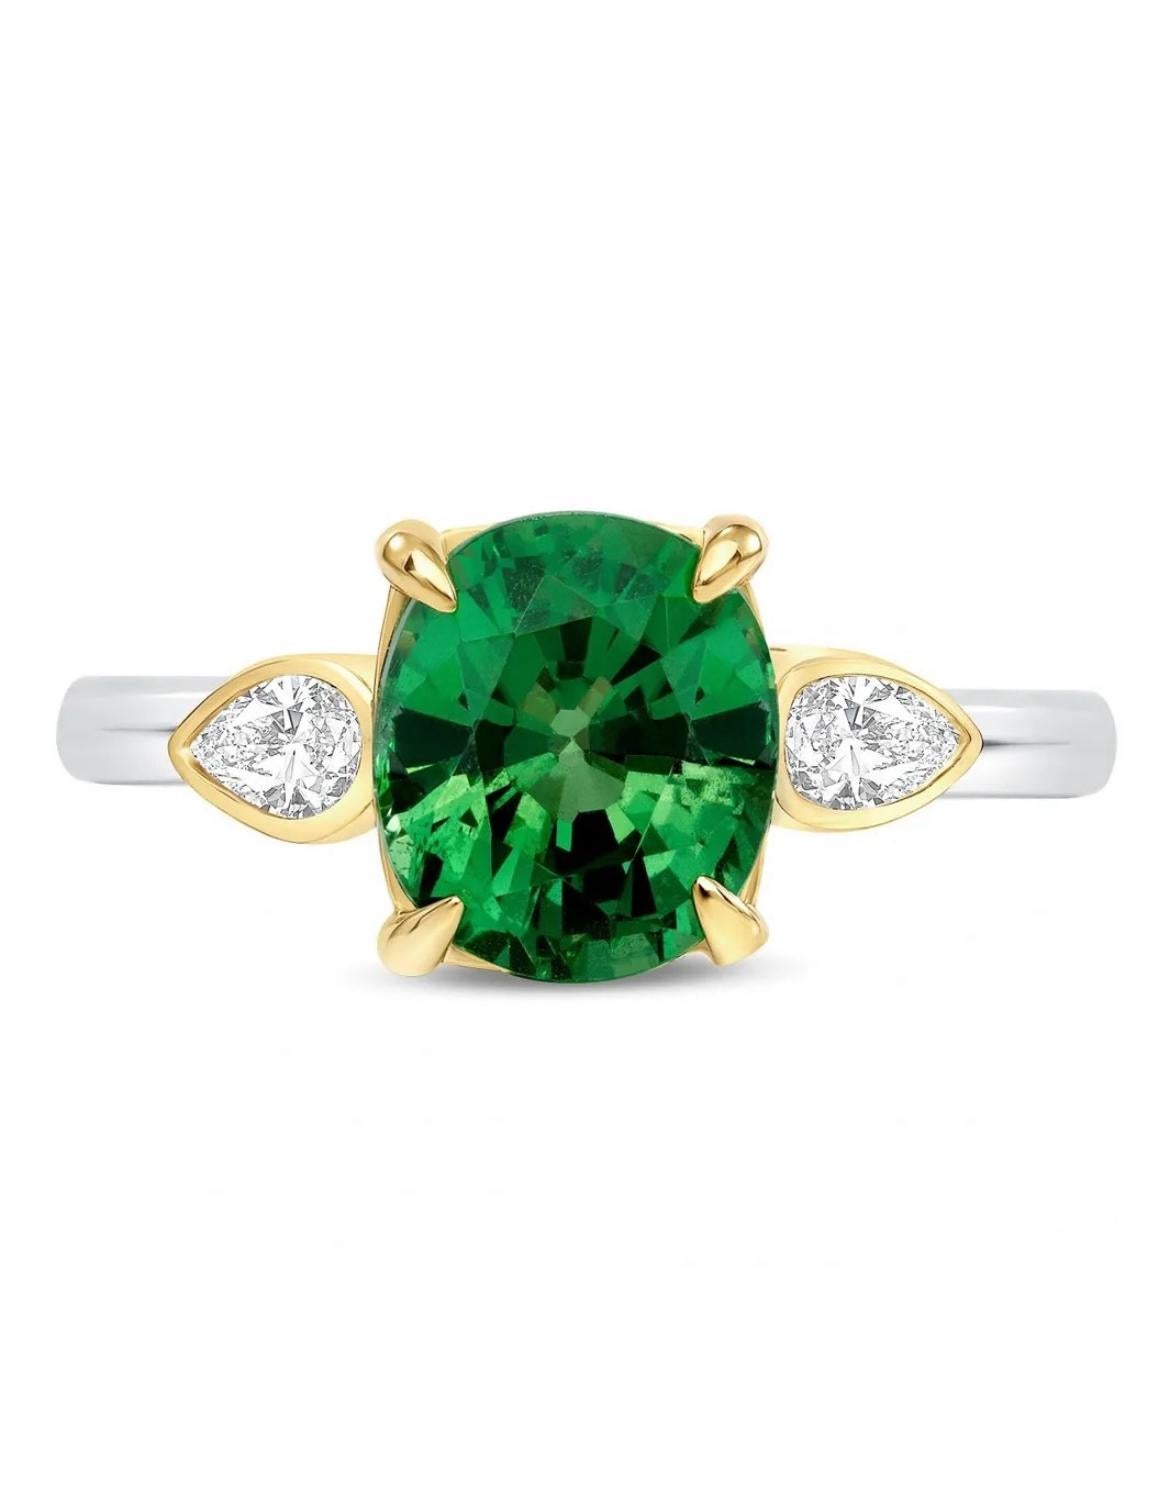 A delightful 2.64-carat, natural Tsavorite Garnet is flanked by two pear-shaped diamonds totaling 0.22 carats, fabricated in 18K. Tsavorite is GIA certified. 